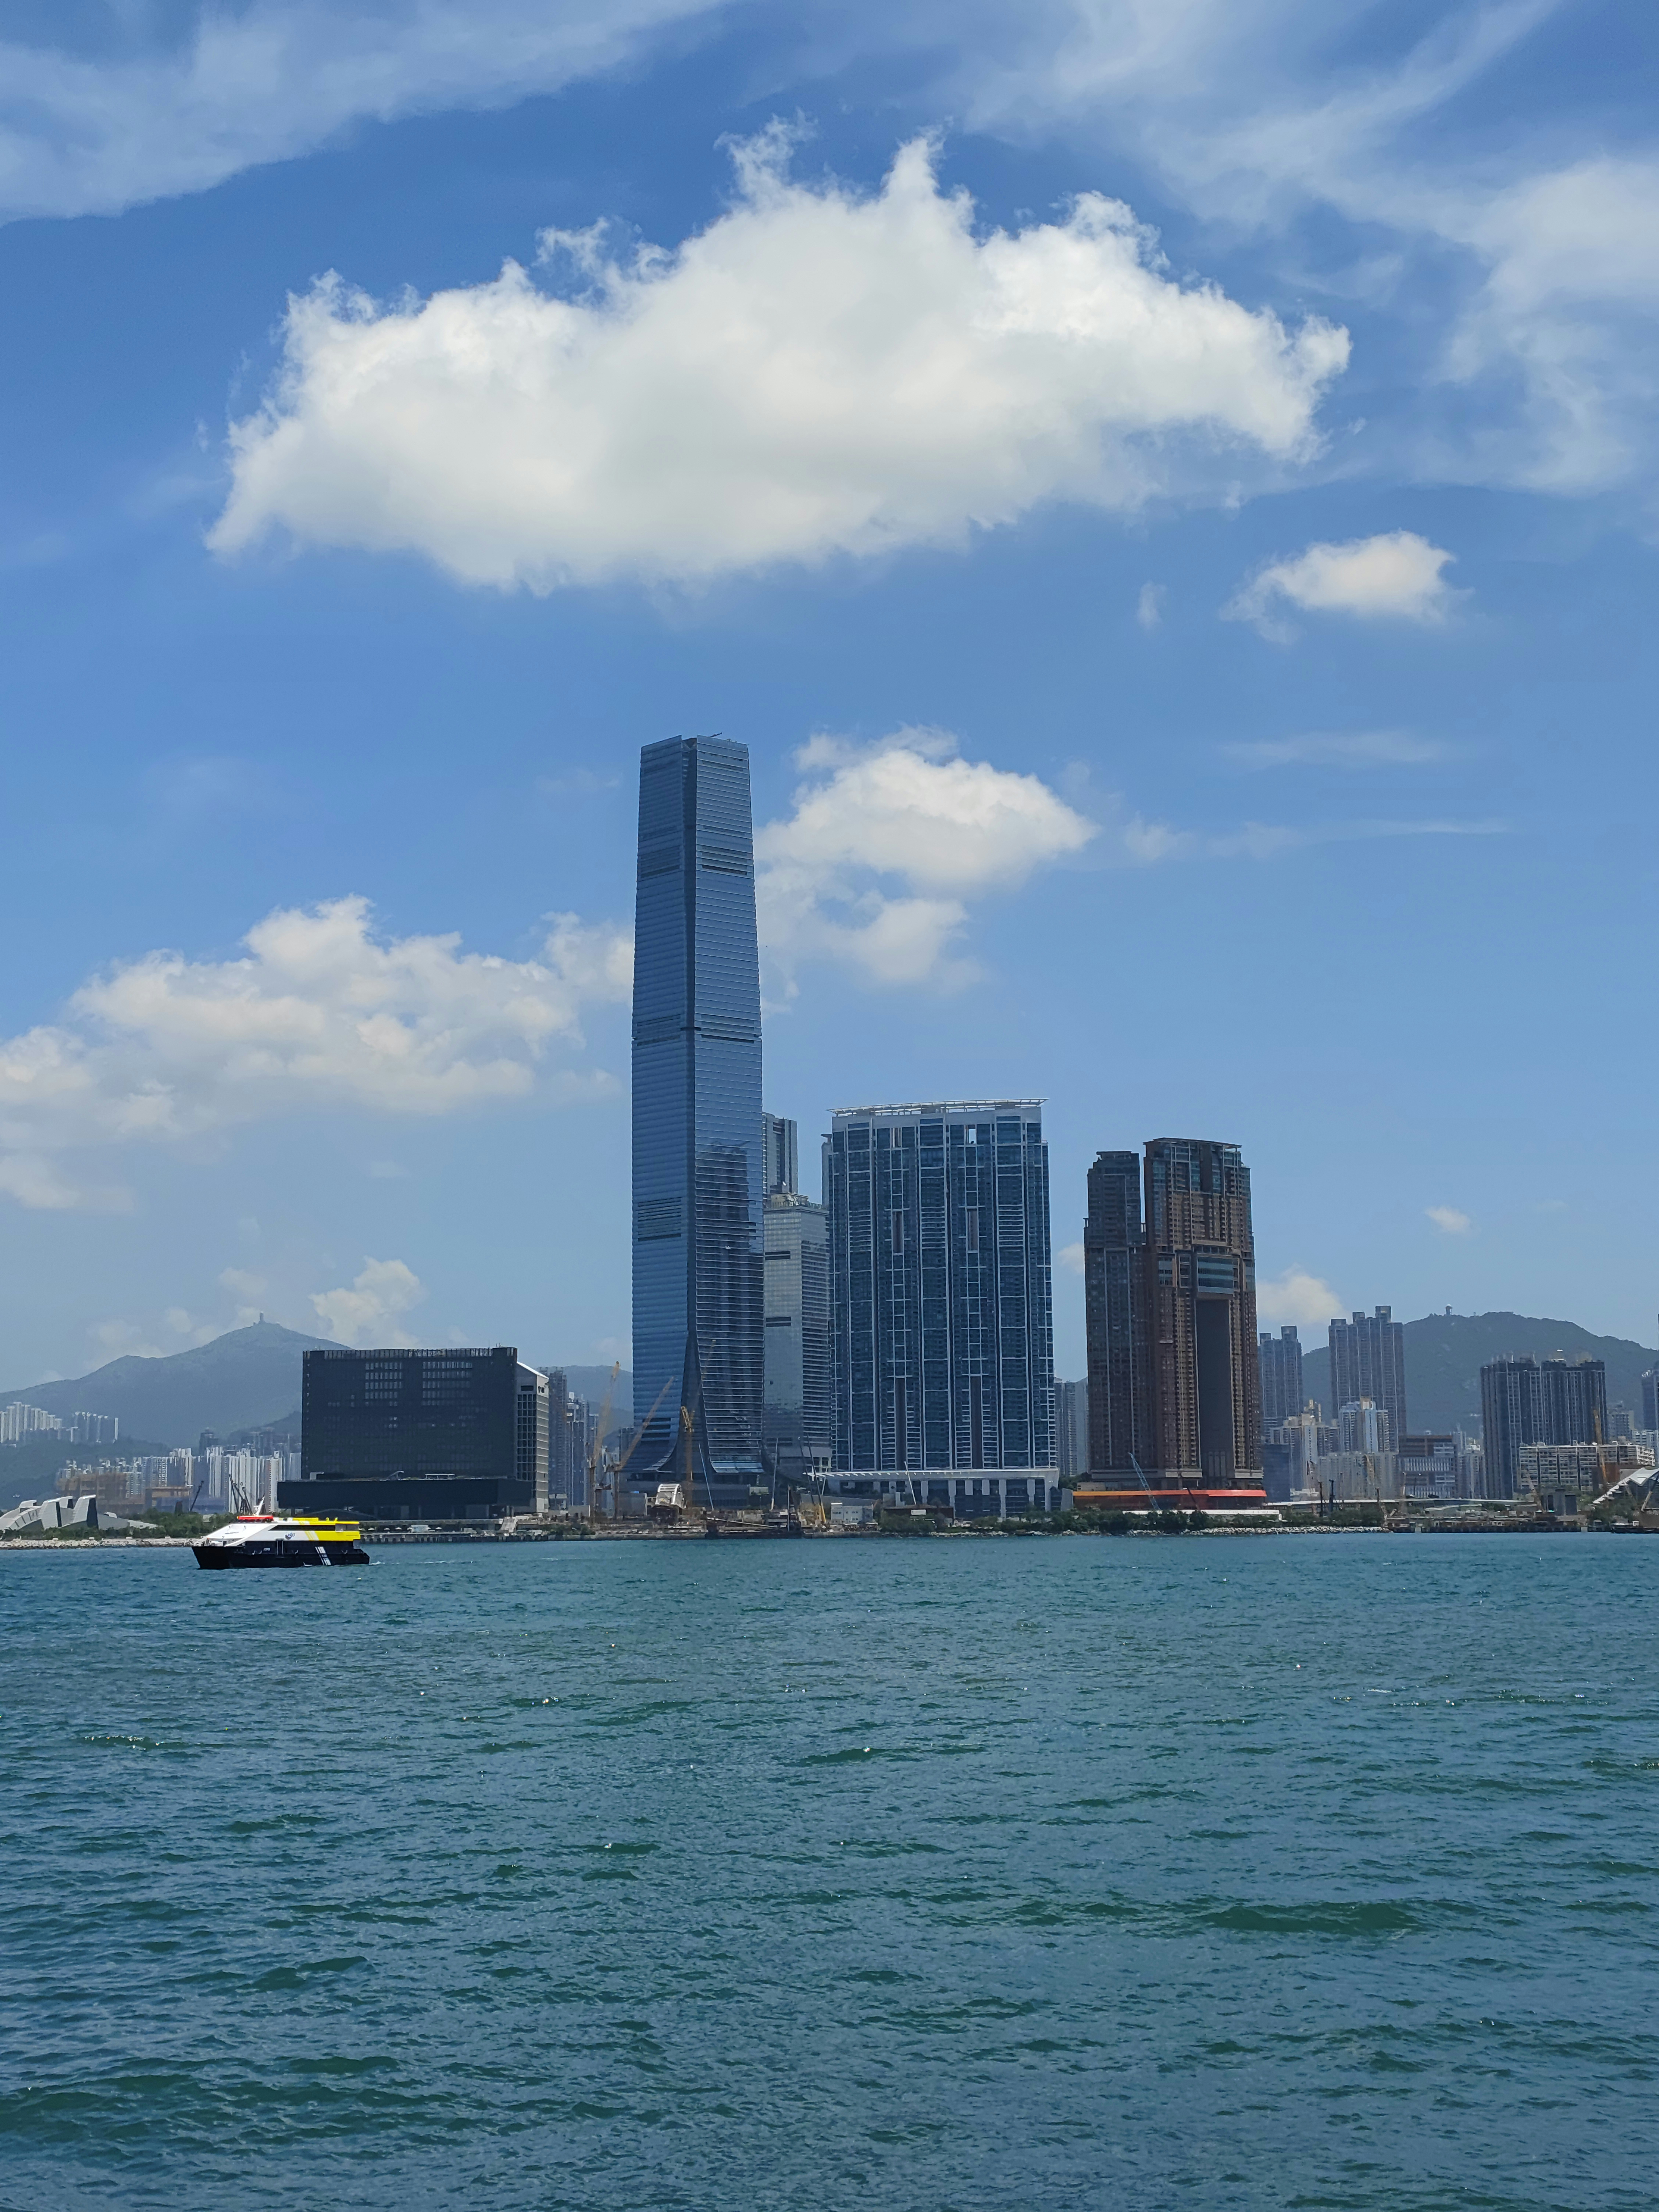 Four iconic buildings: M+ Museum of Visual Culture, ICC, The Harbourside, and The Arch in West Kowloon Cultural District of HK.